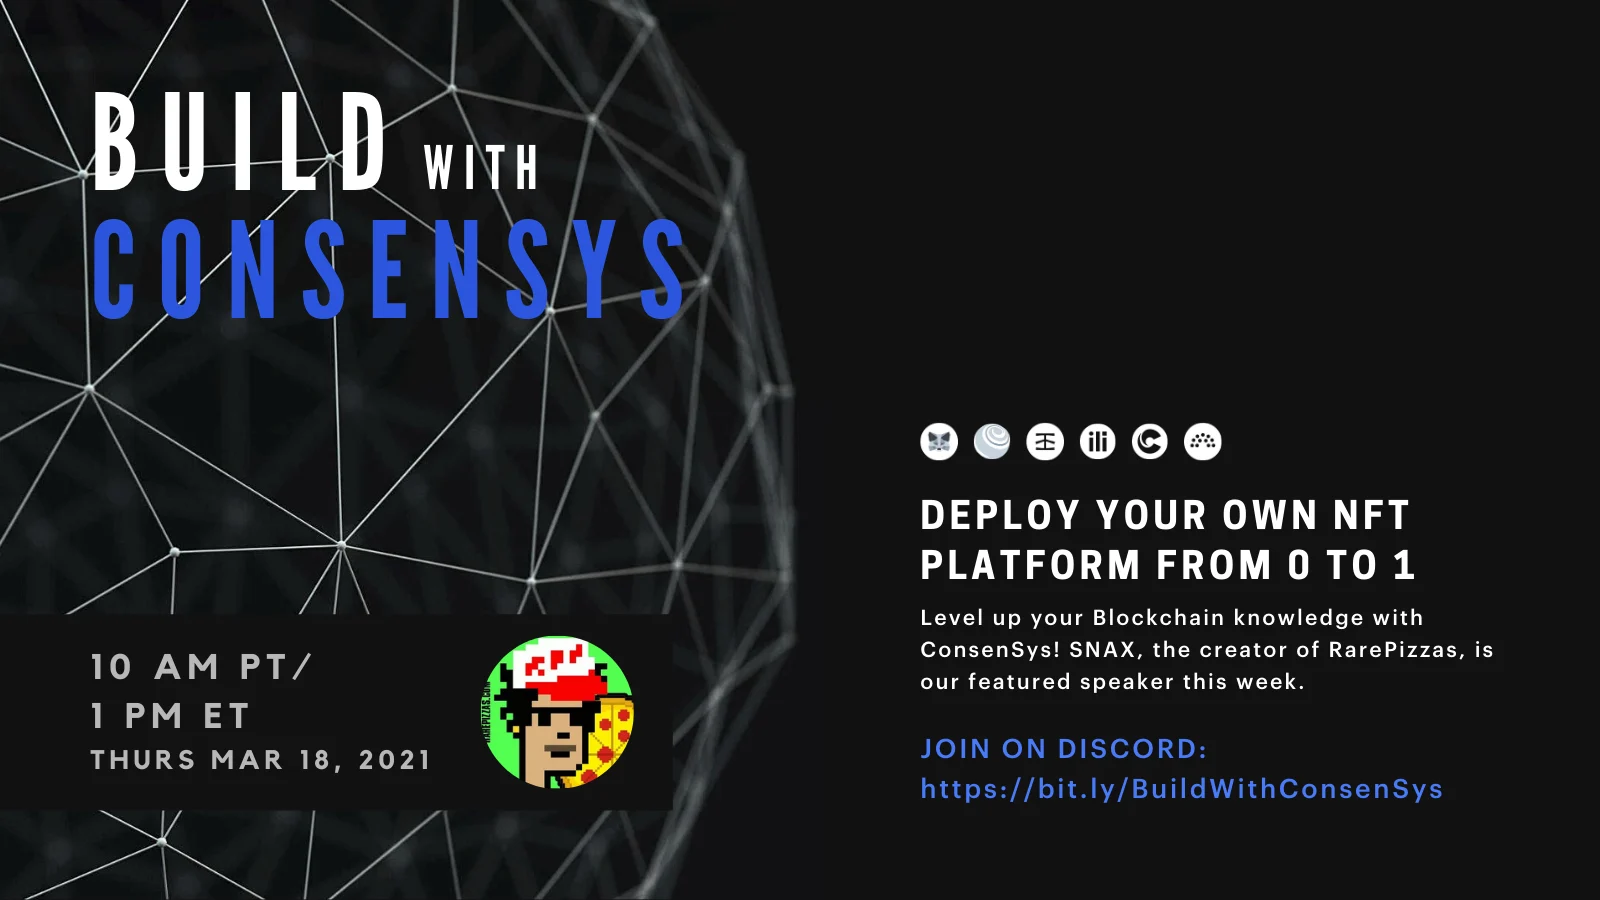 Image: #BuildWithConsenSys on Discord: Deploy Your Own NFT Platform from 0 to 1